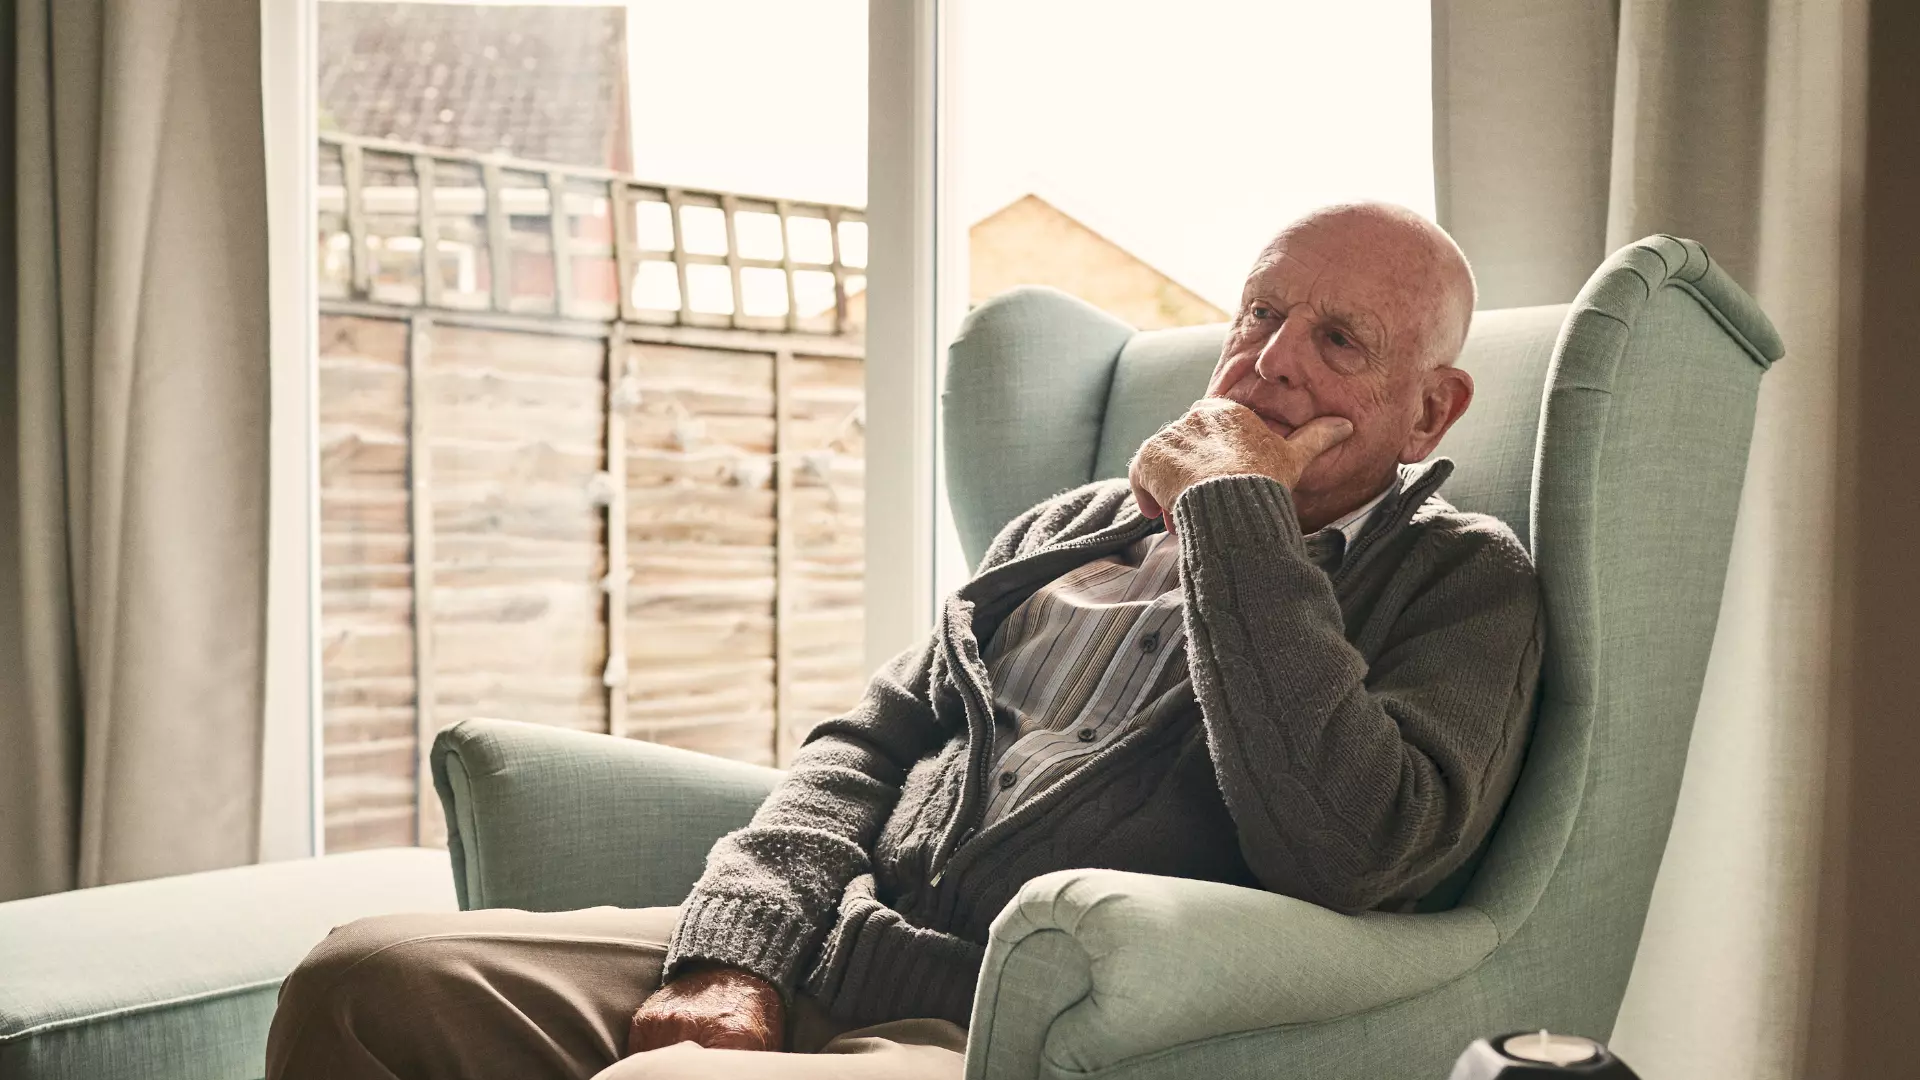 Donate to Age Scotland to support lonely older people